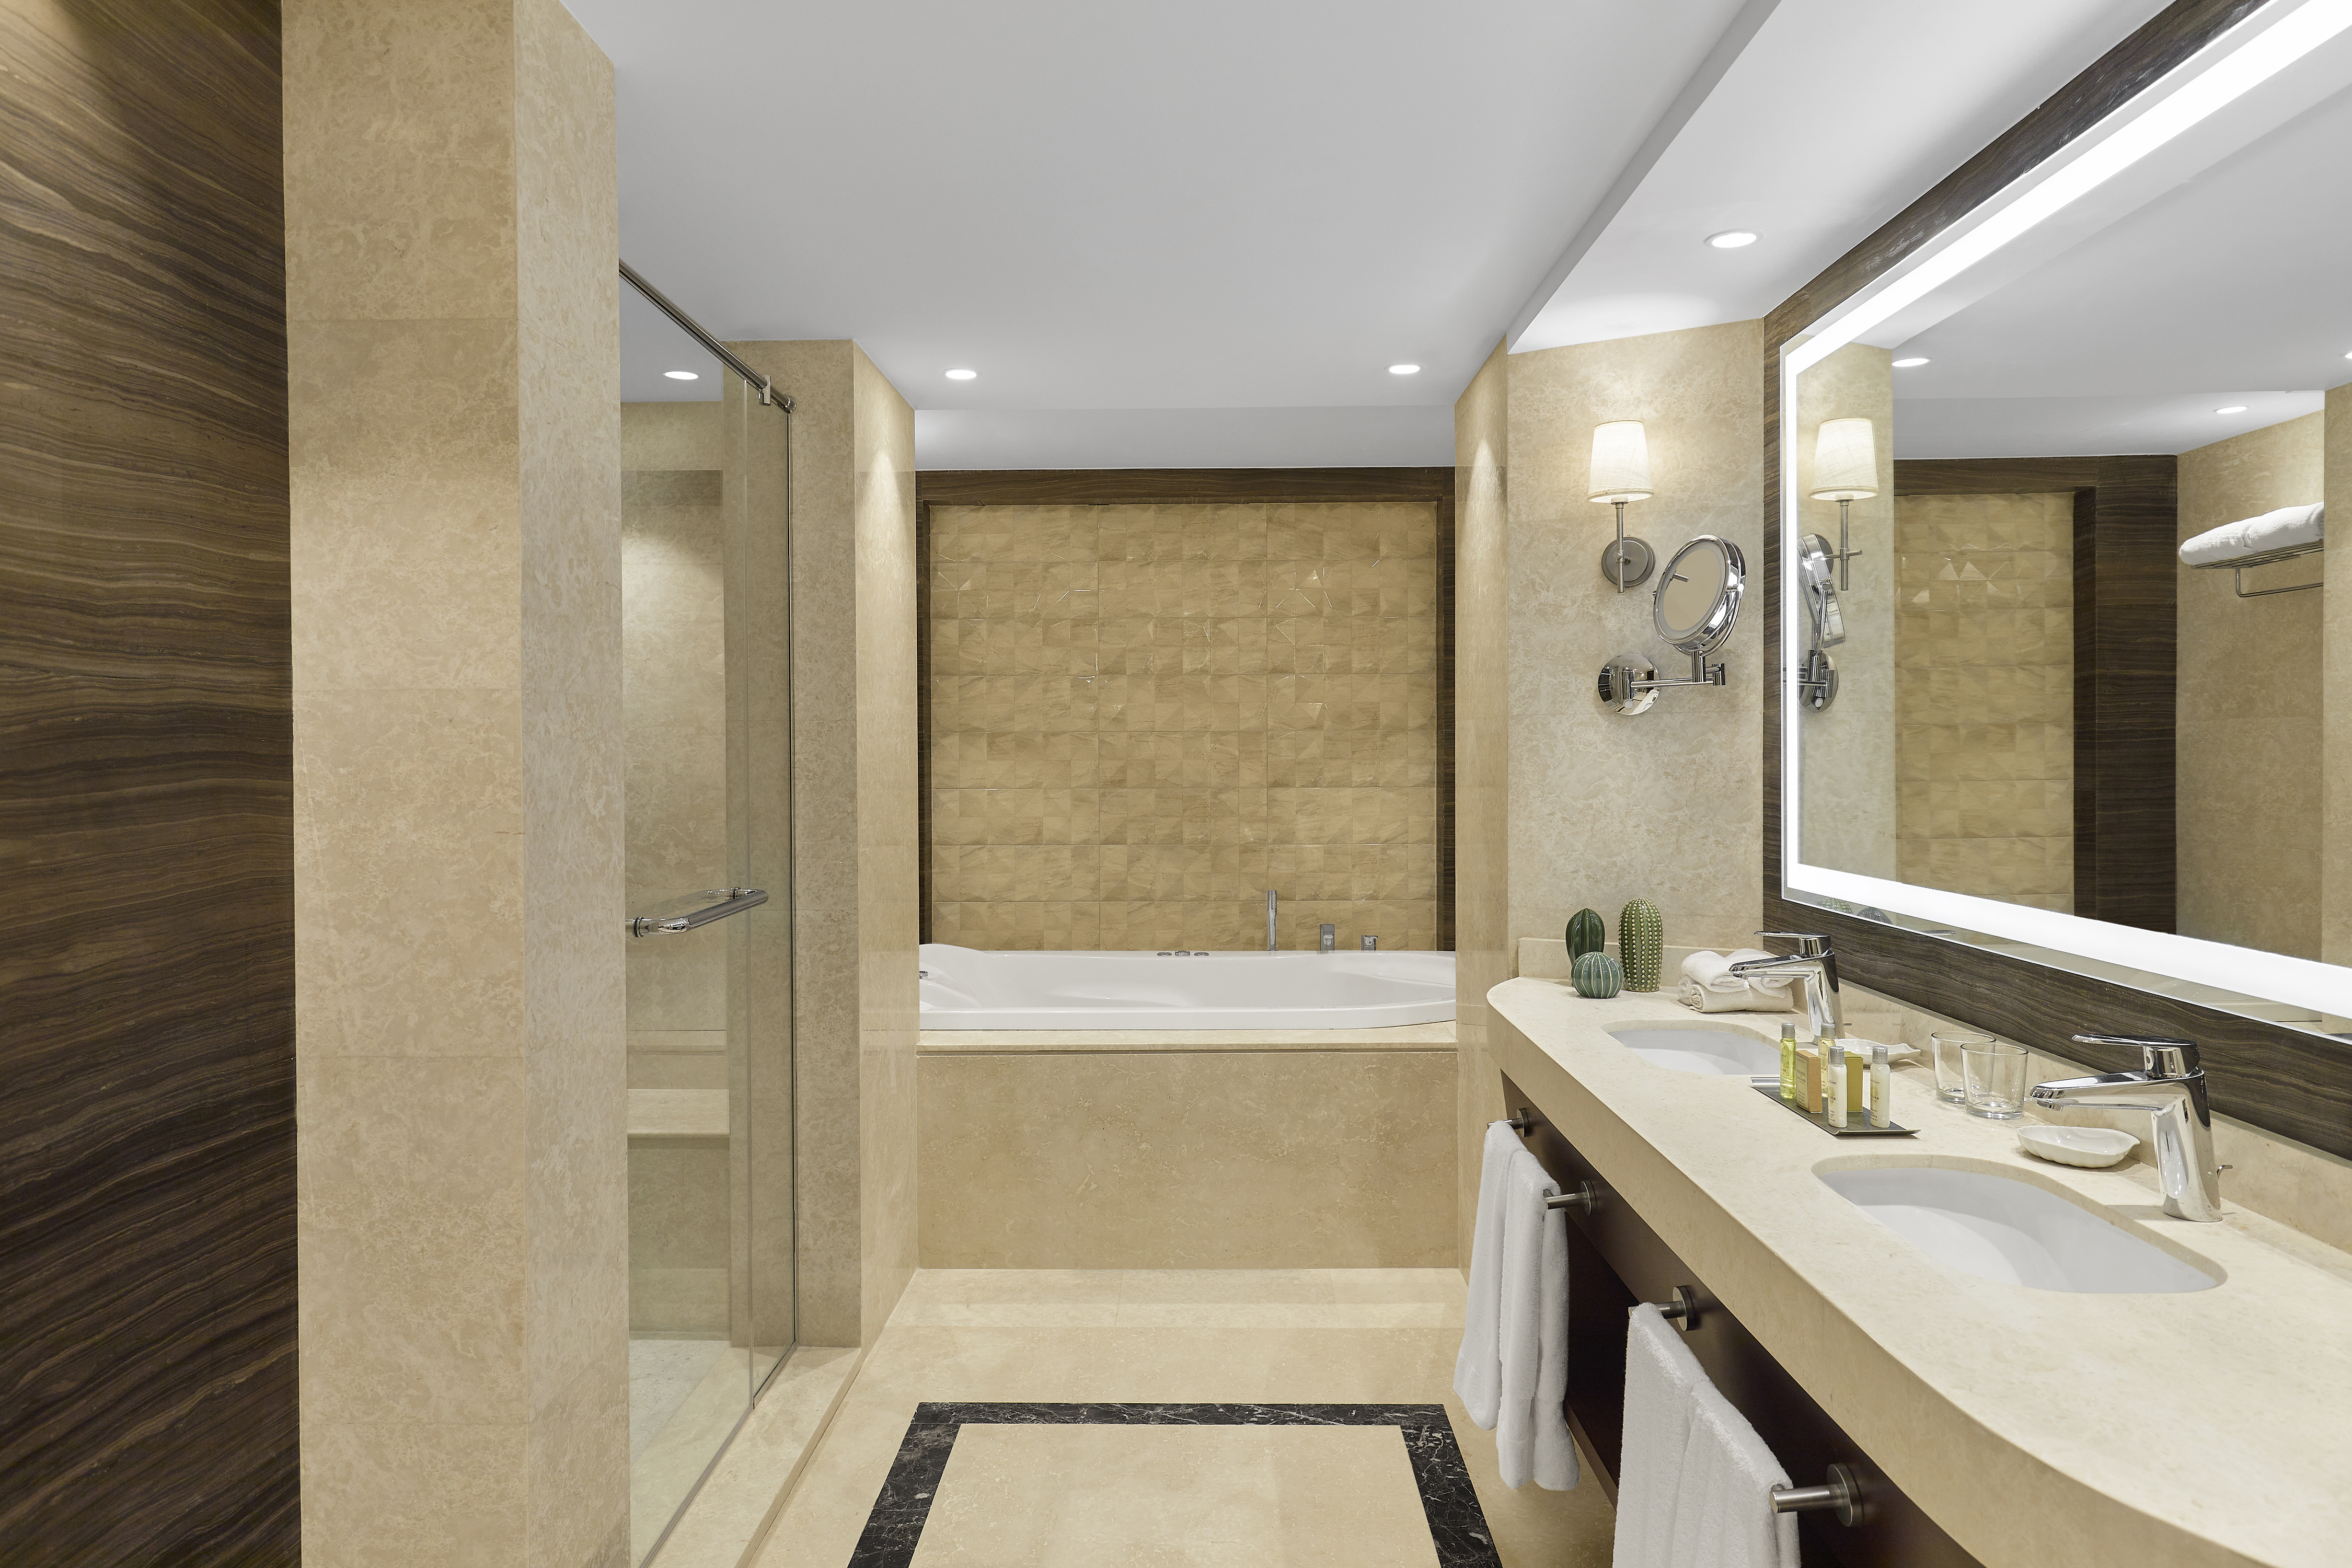 Suite Bathroom with Dual Vanity Area Bathtub and Separate Shower